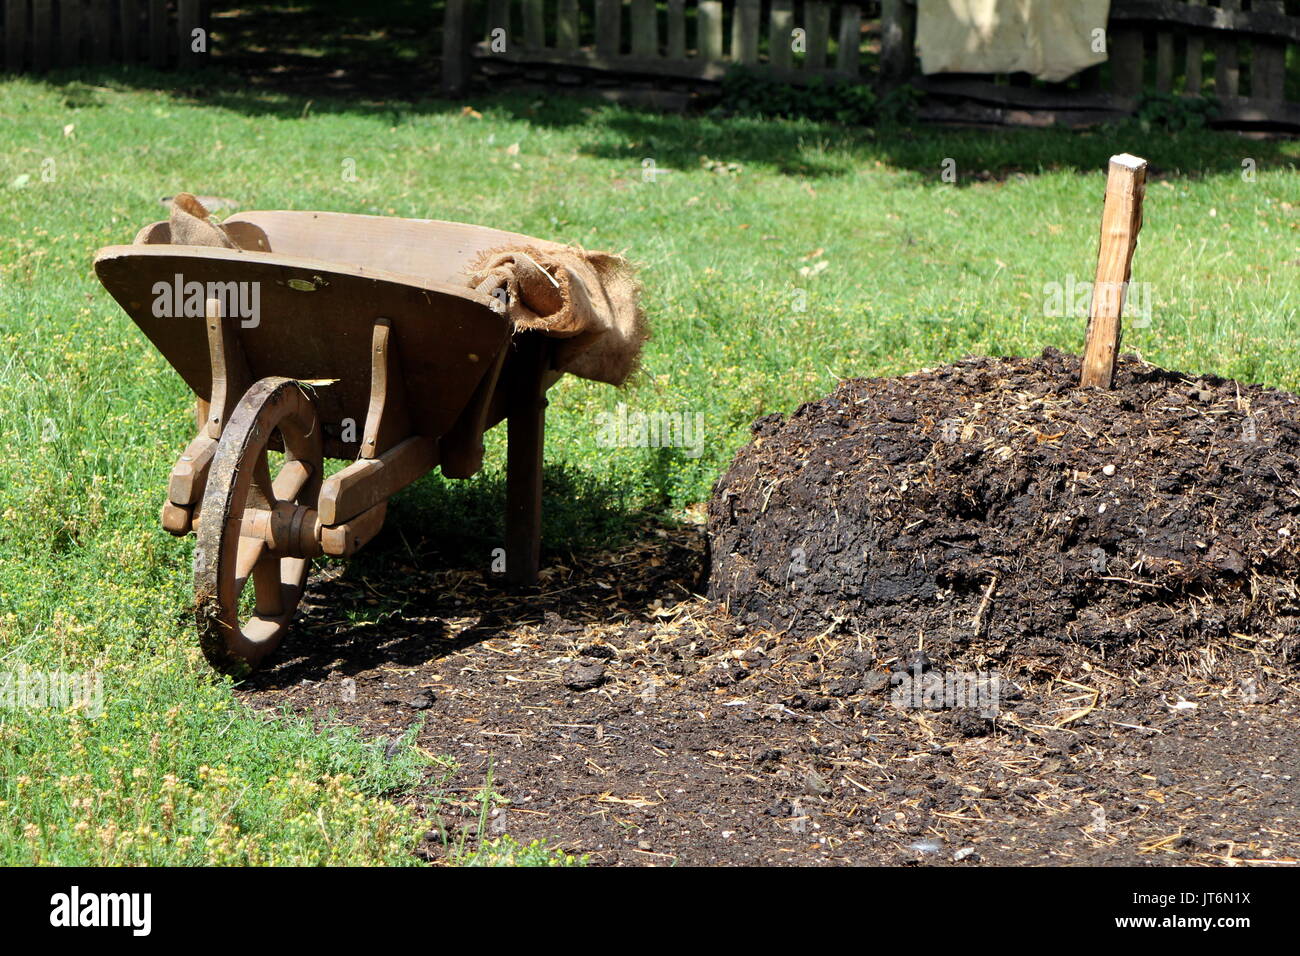 Old wooden wheelbarrow next to a large pile of manure Stock Photo